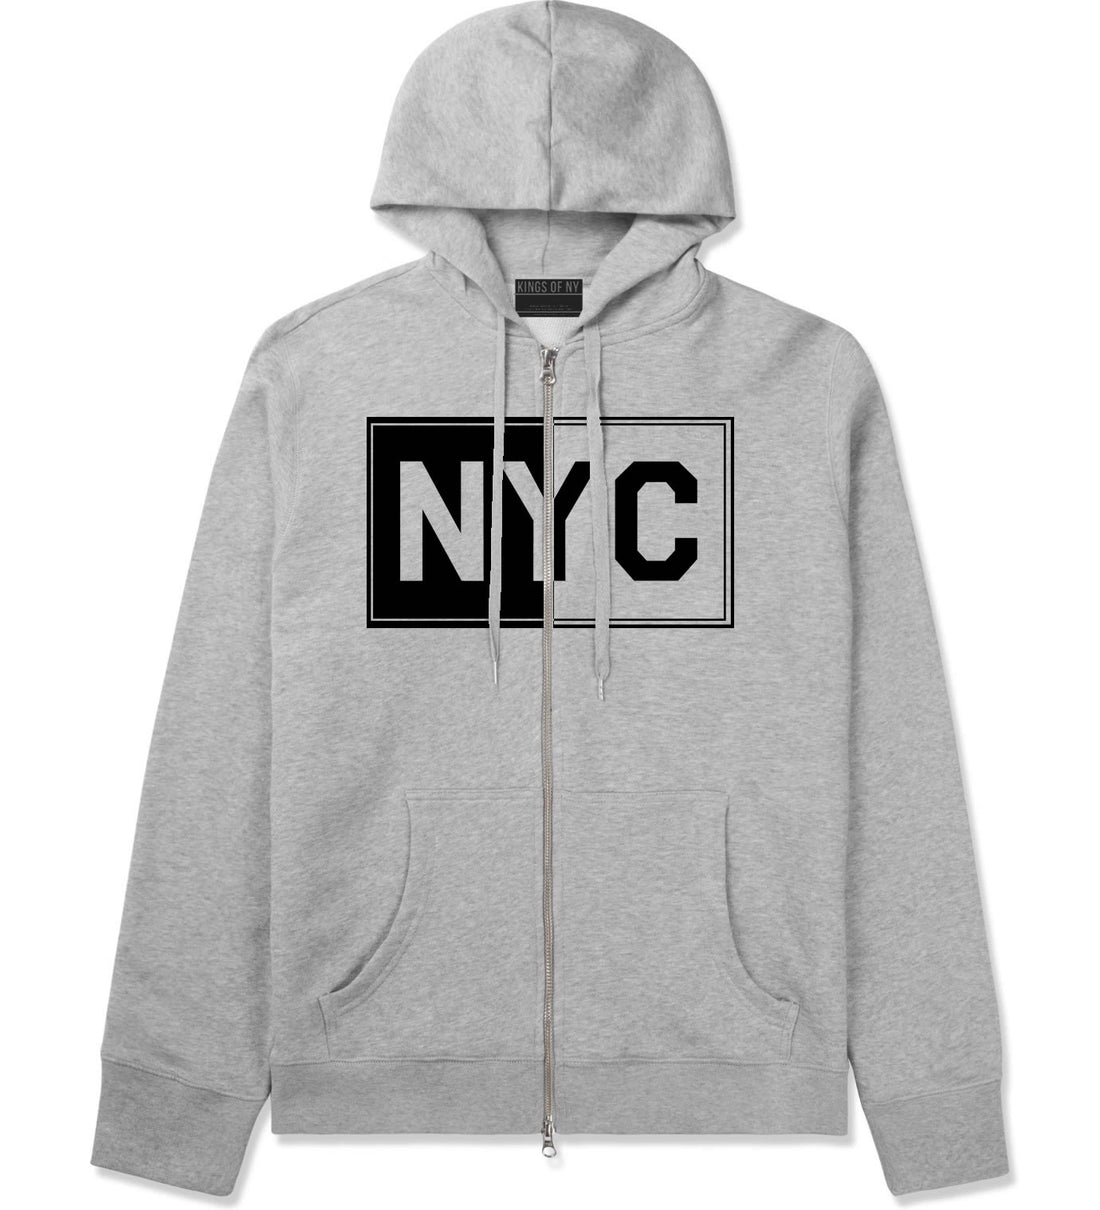 NYC Rectangle New York City Zip Up Hoodie in Grey By Kings Of NY